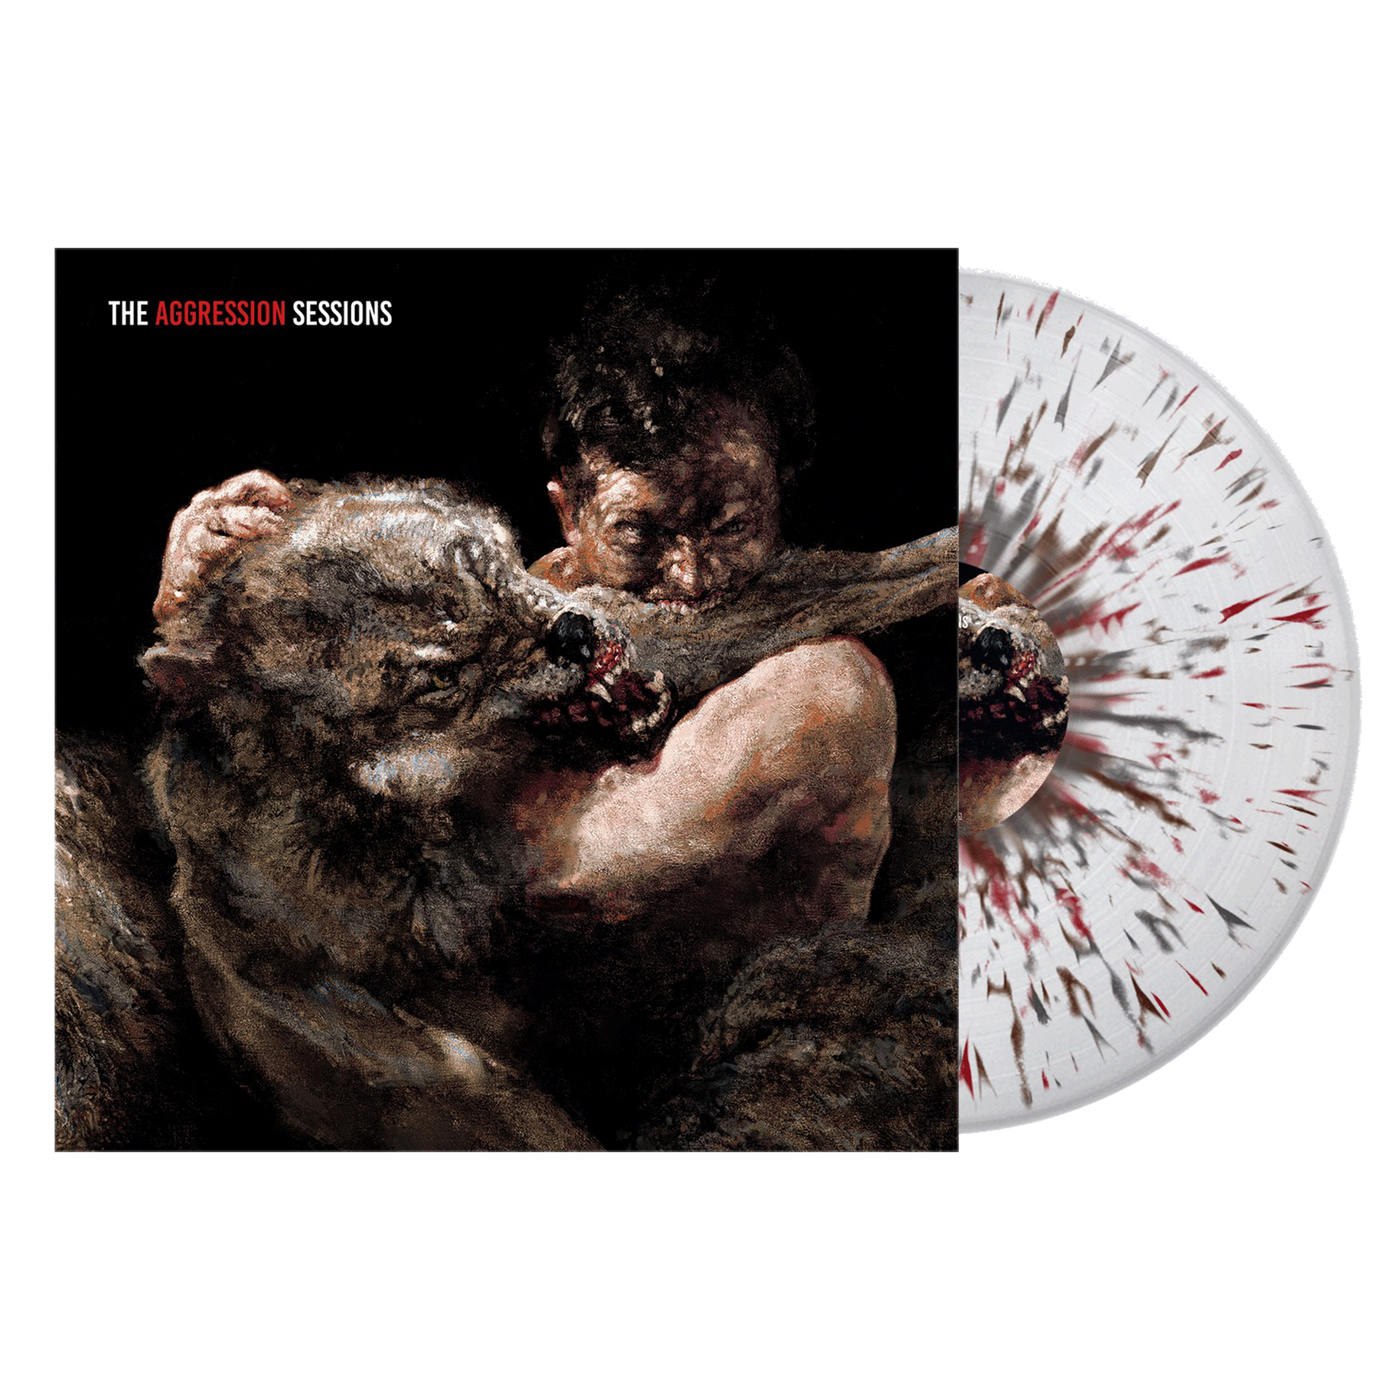 The Aggression Sessions Vinyl LP